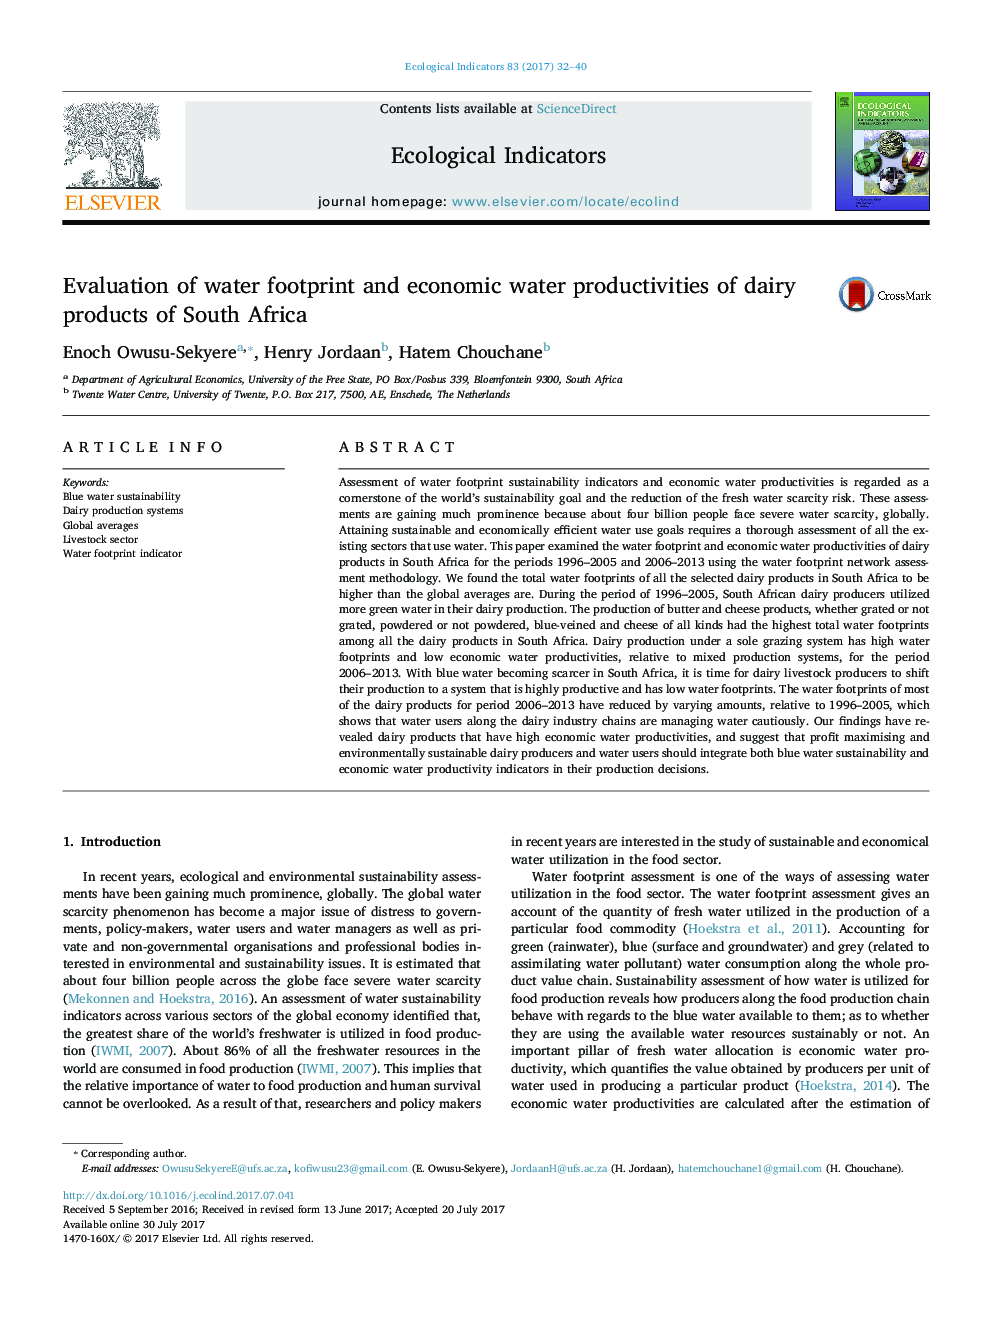 Evaluation of water footprint and economic water productivities of dairy products of South Africa